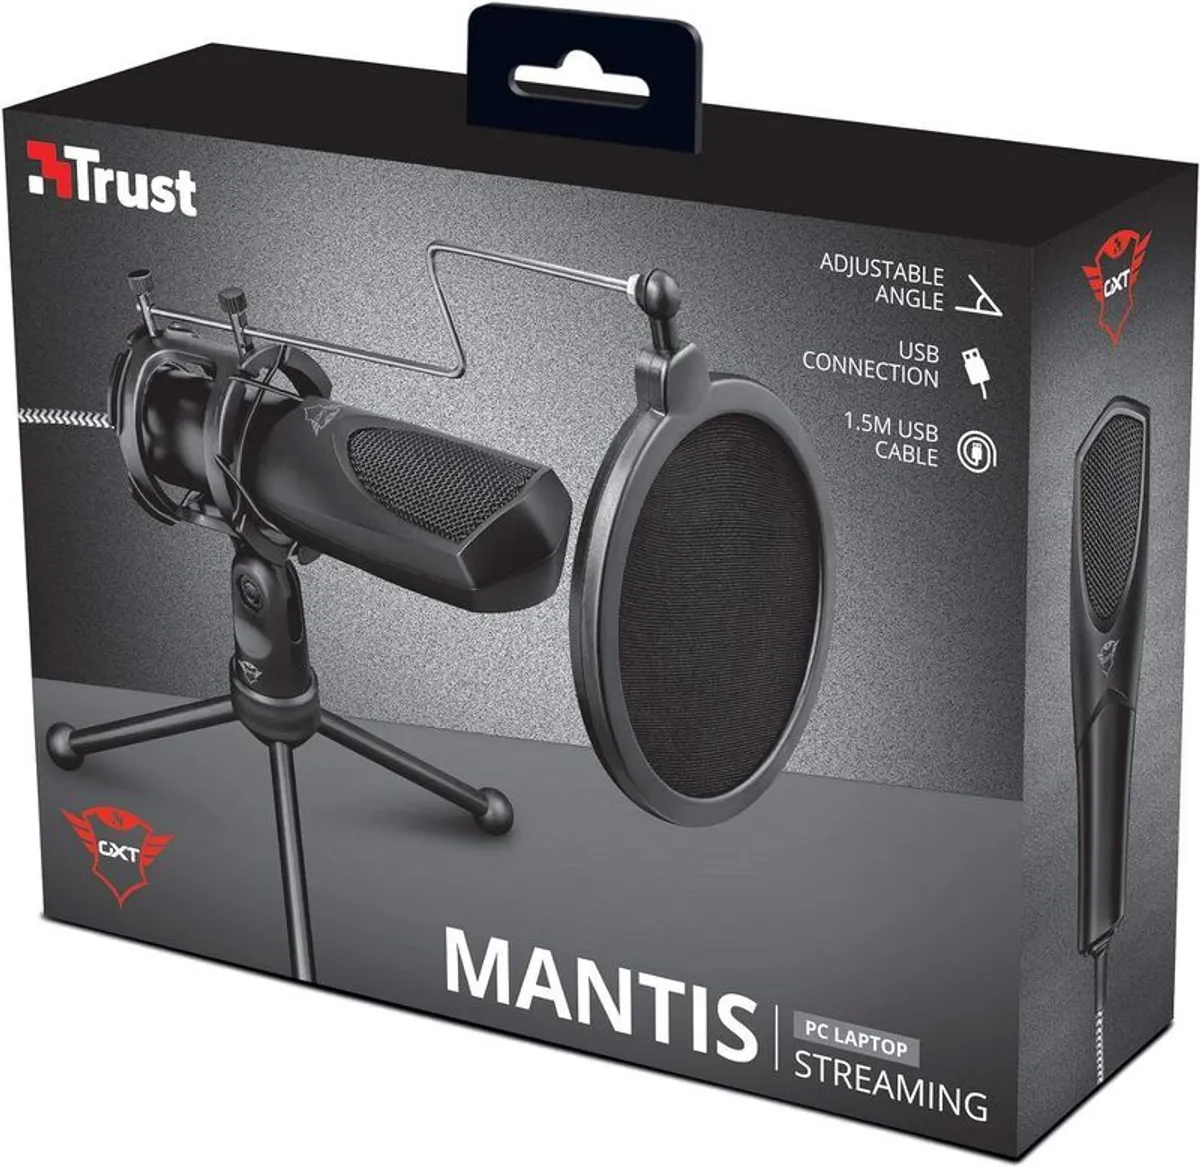 Trust Gaming GXT 232 Mantis Streaming Gaming Microphone for PC, PS4 and PS5